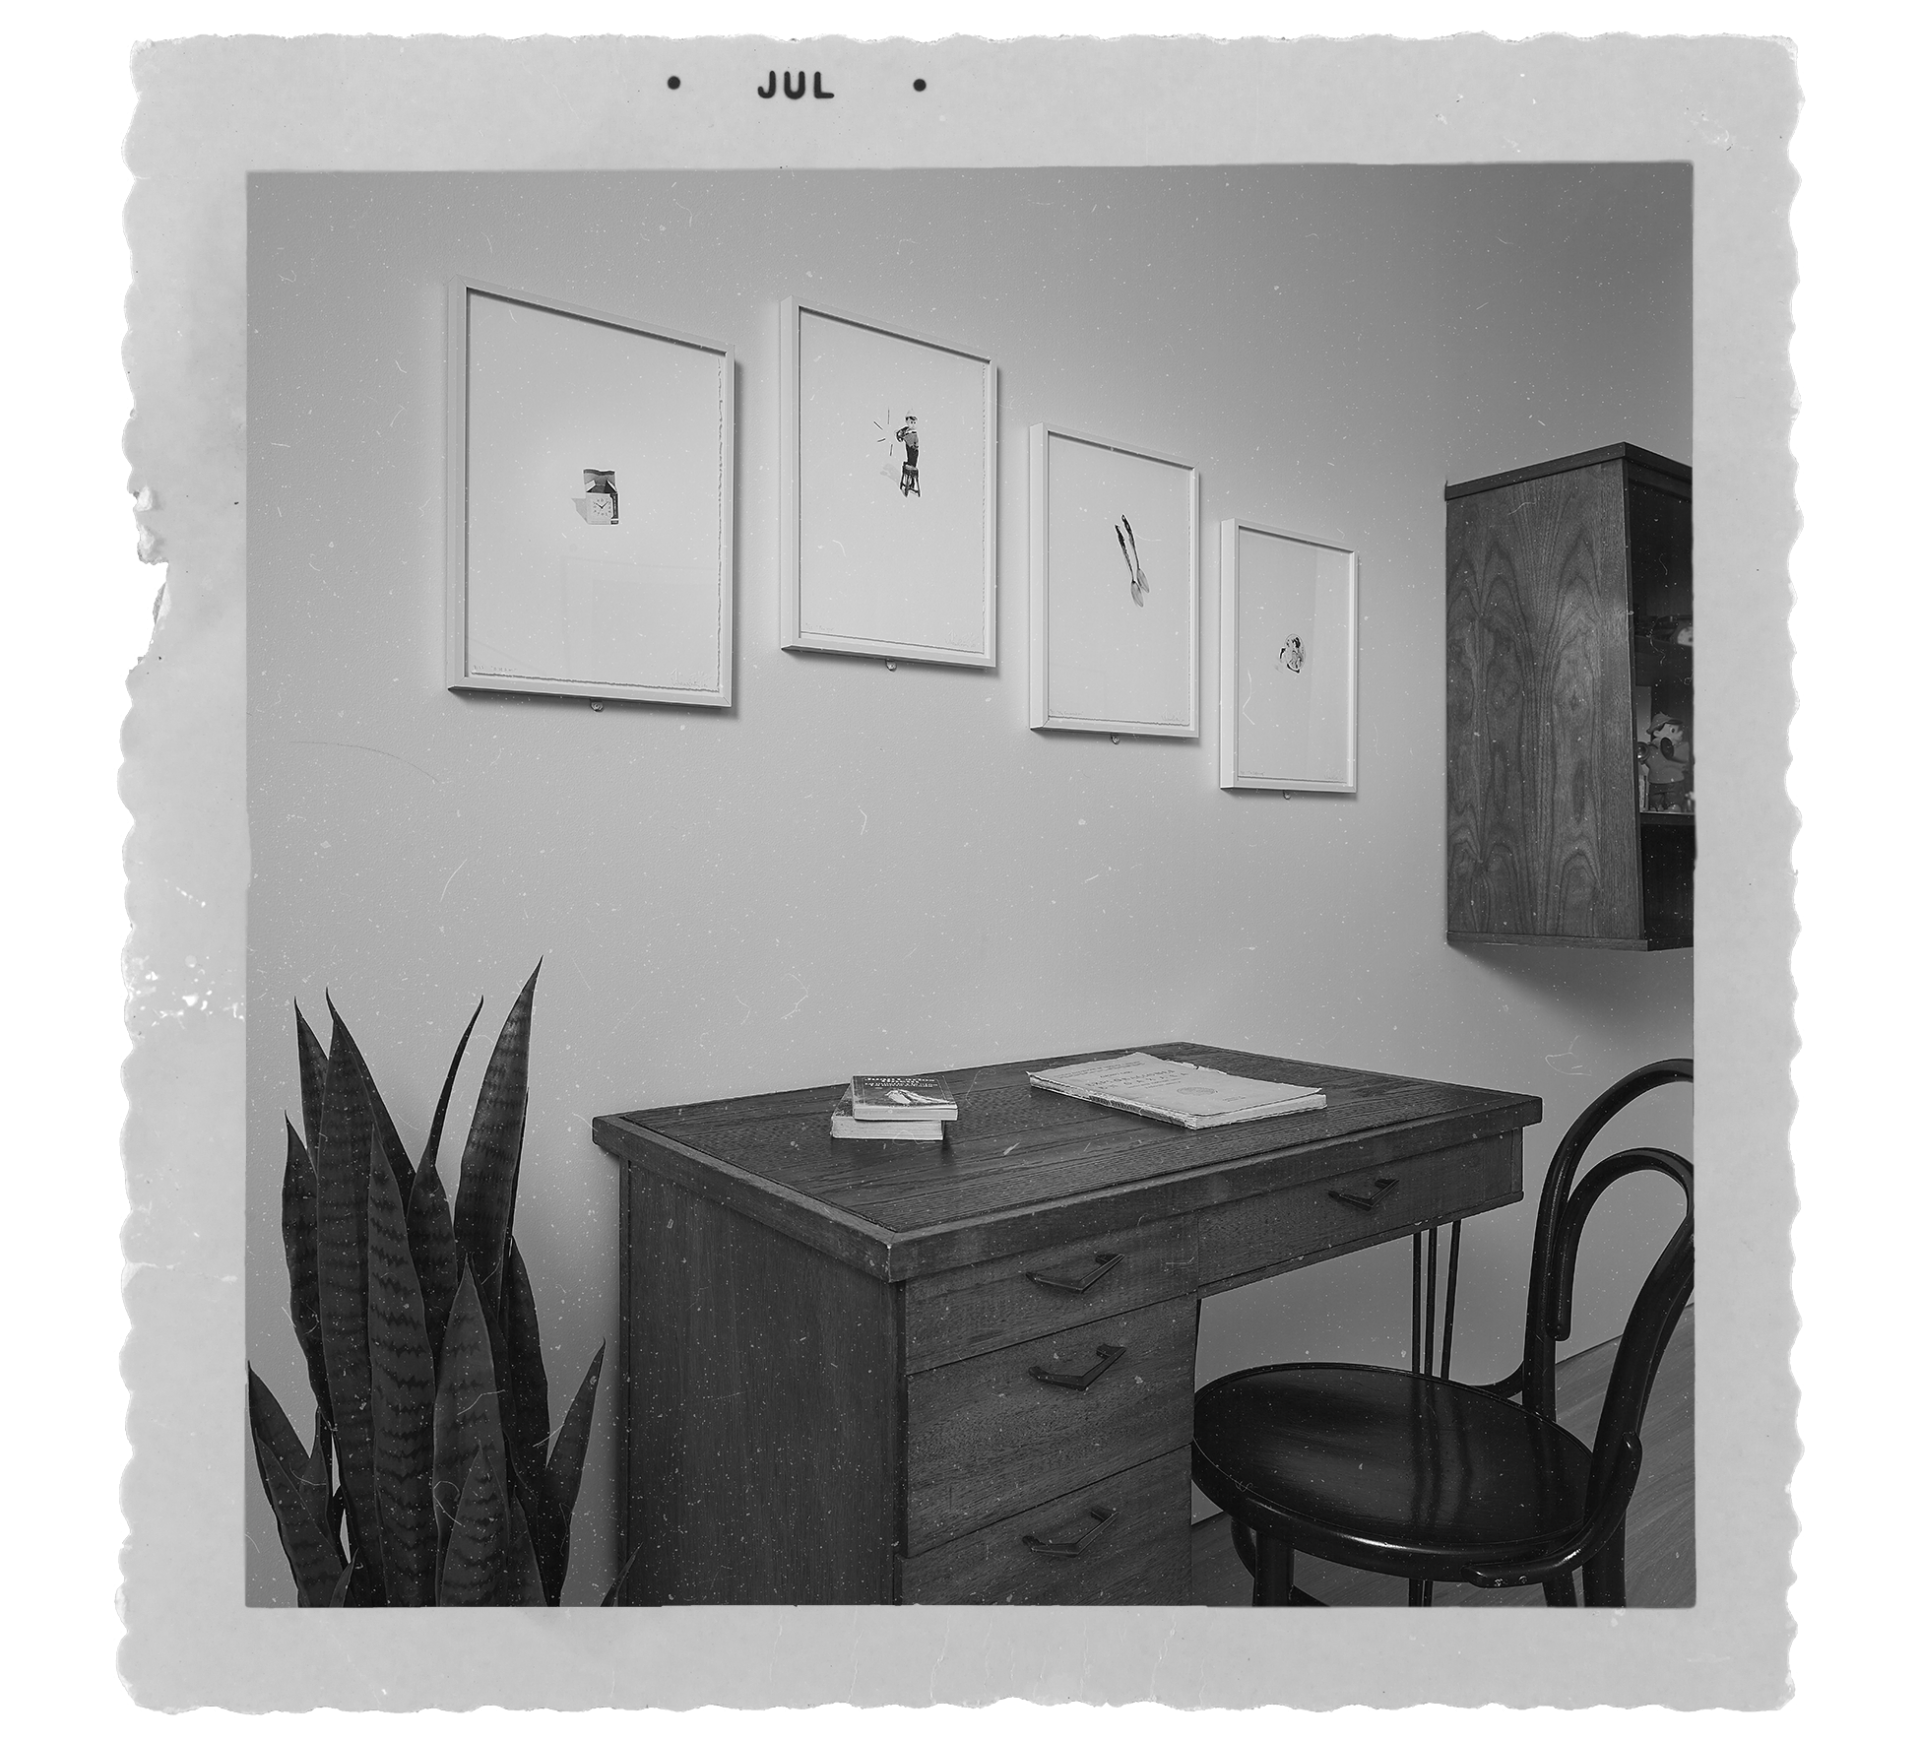 "Old" photograph of three photo-litho prints by Liliana Porter hanging on a wall above a desk